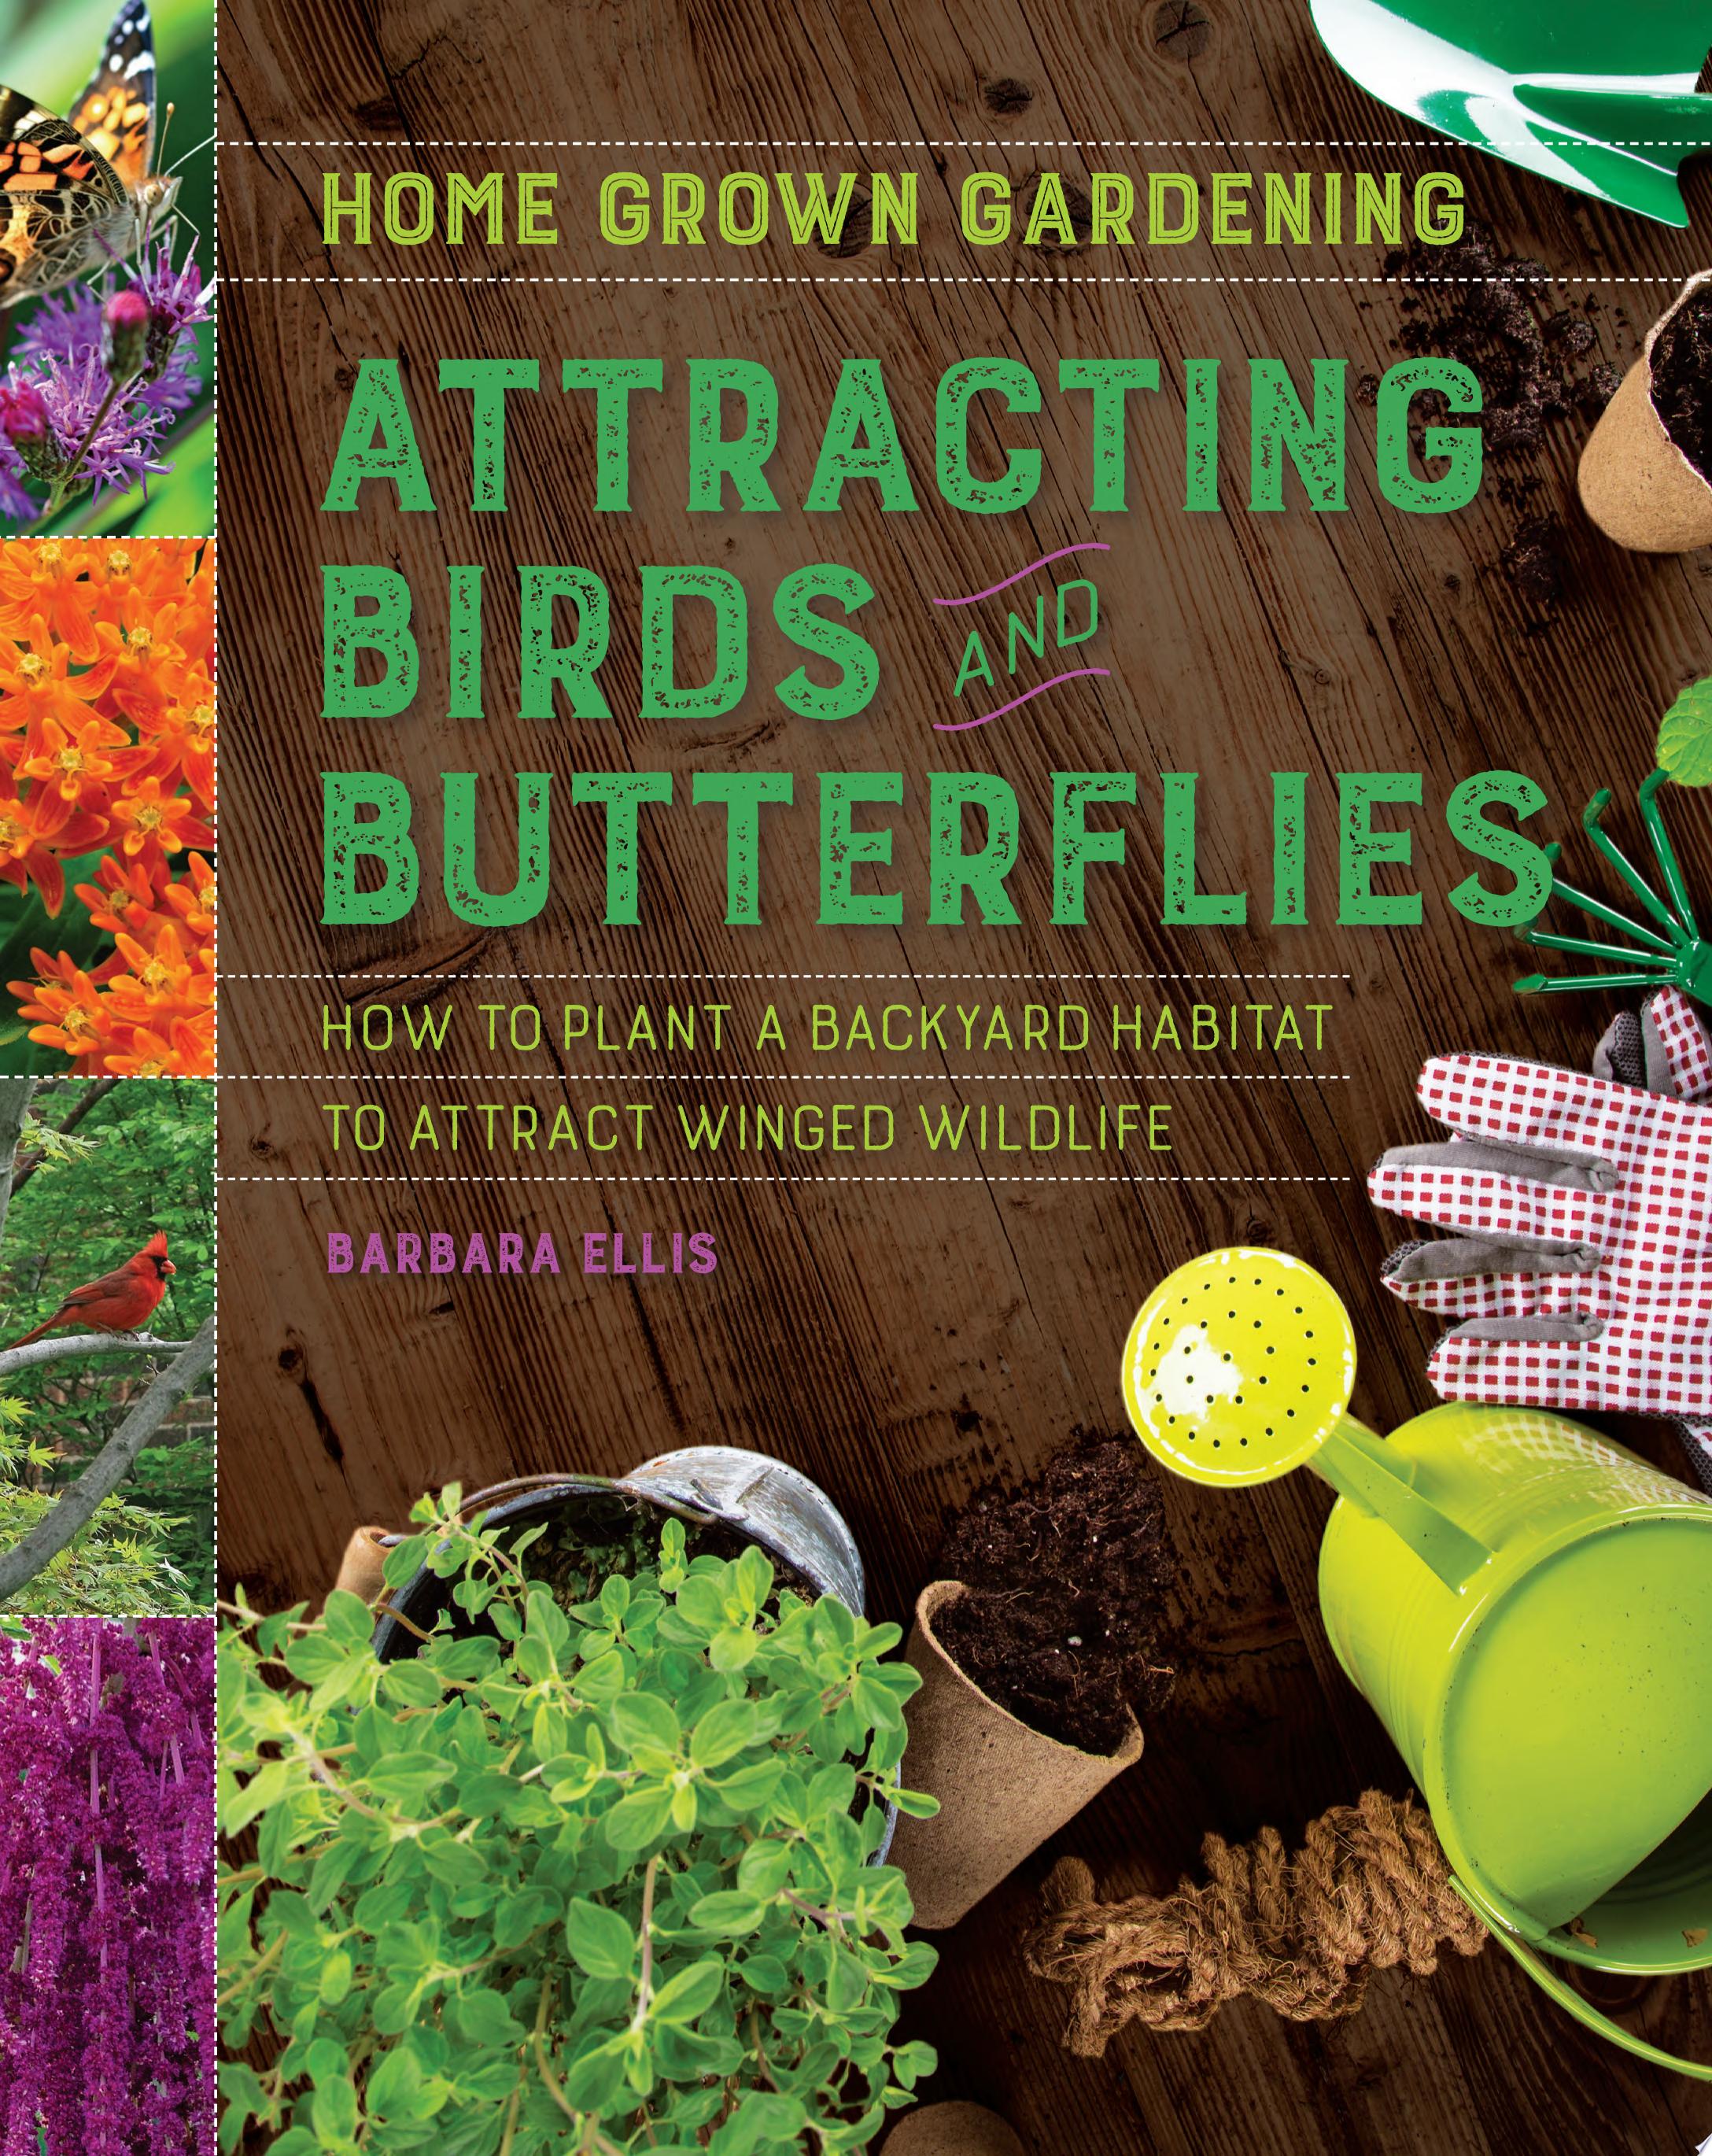 Image for "Attracting Birds and Butterflies"